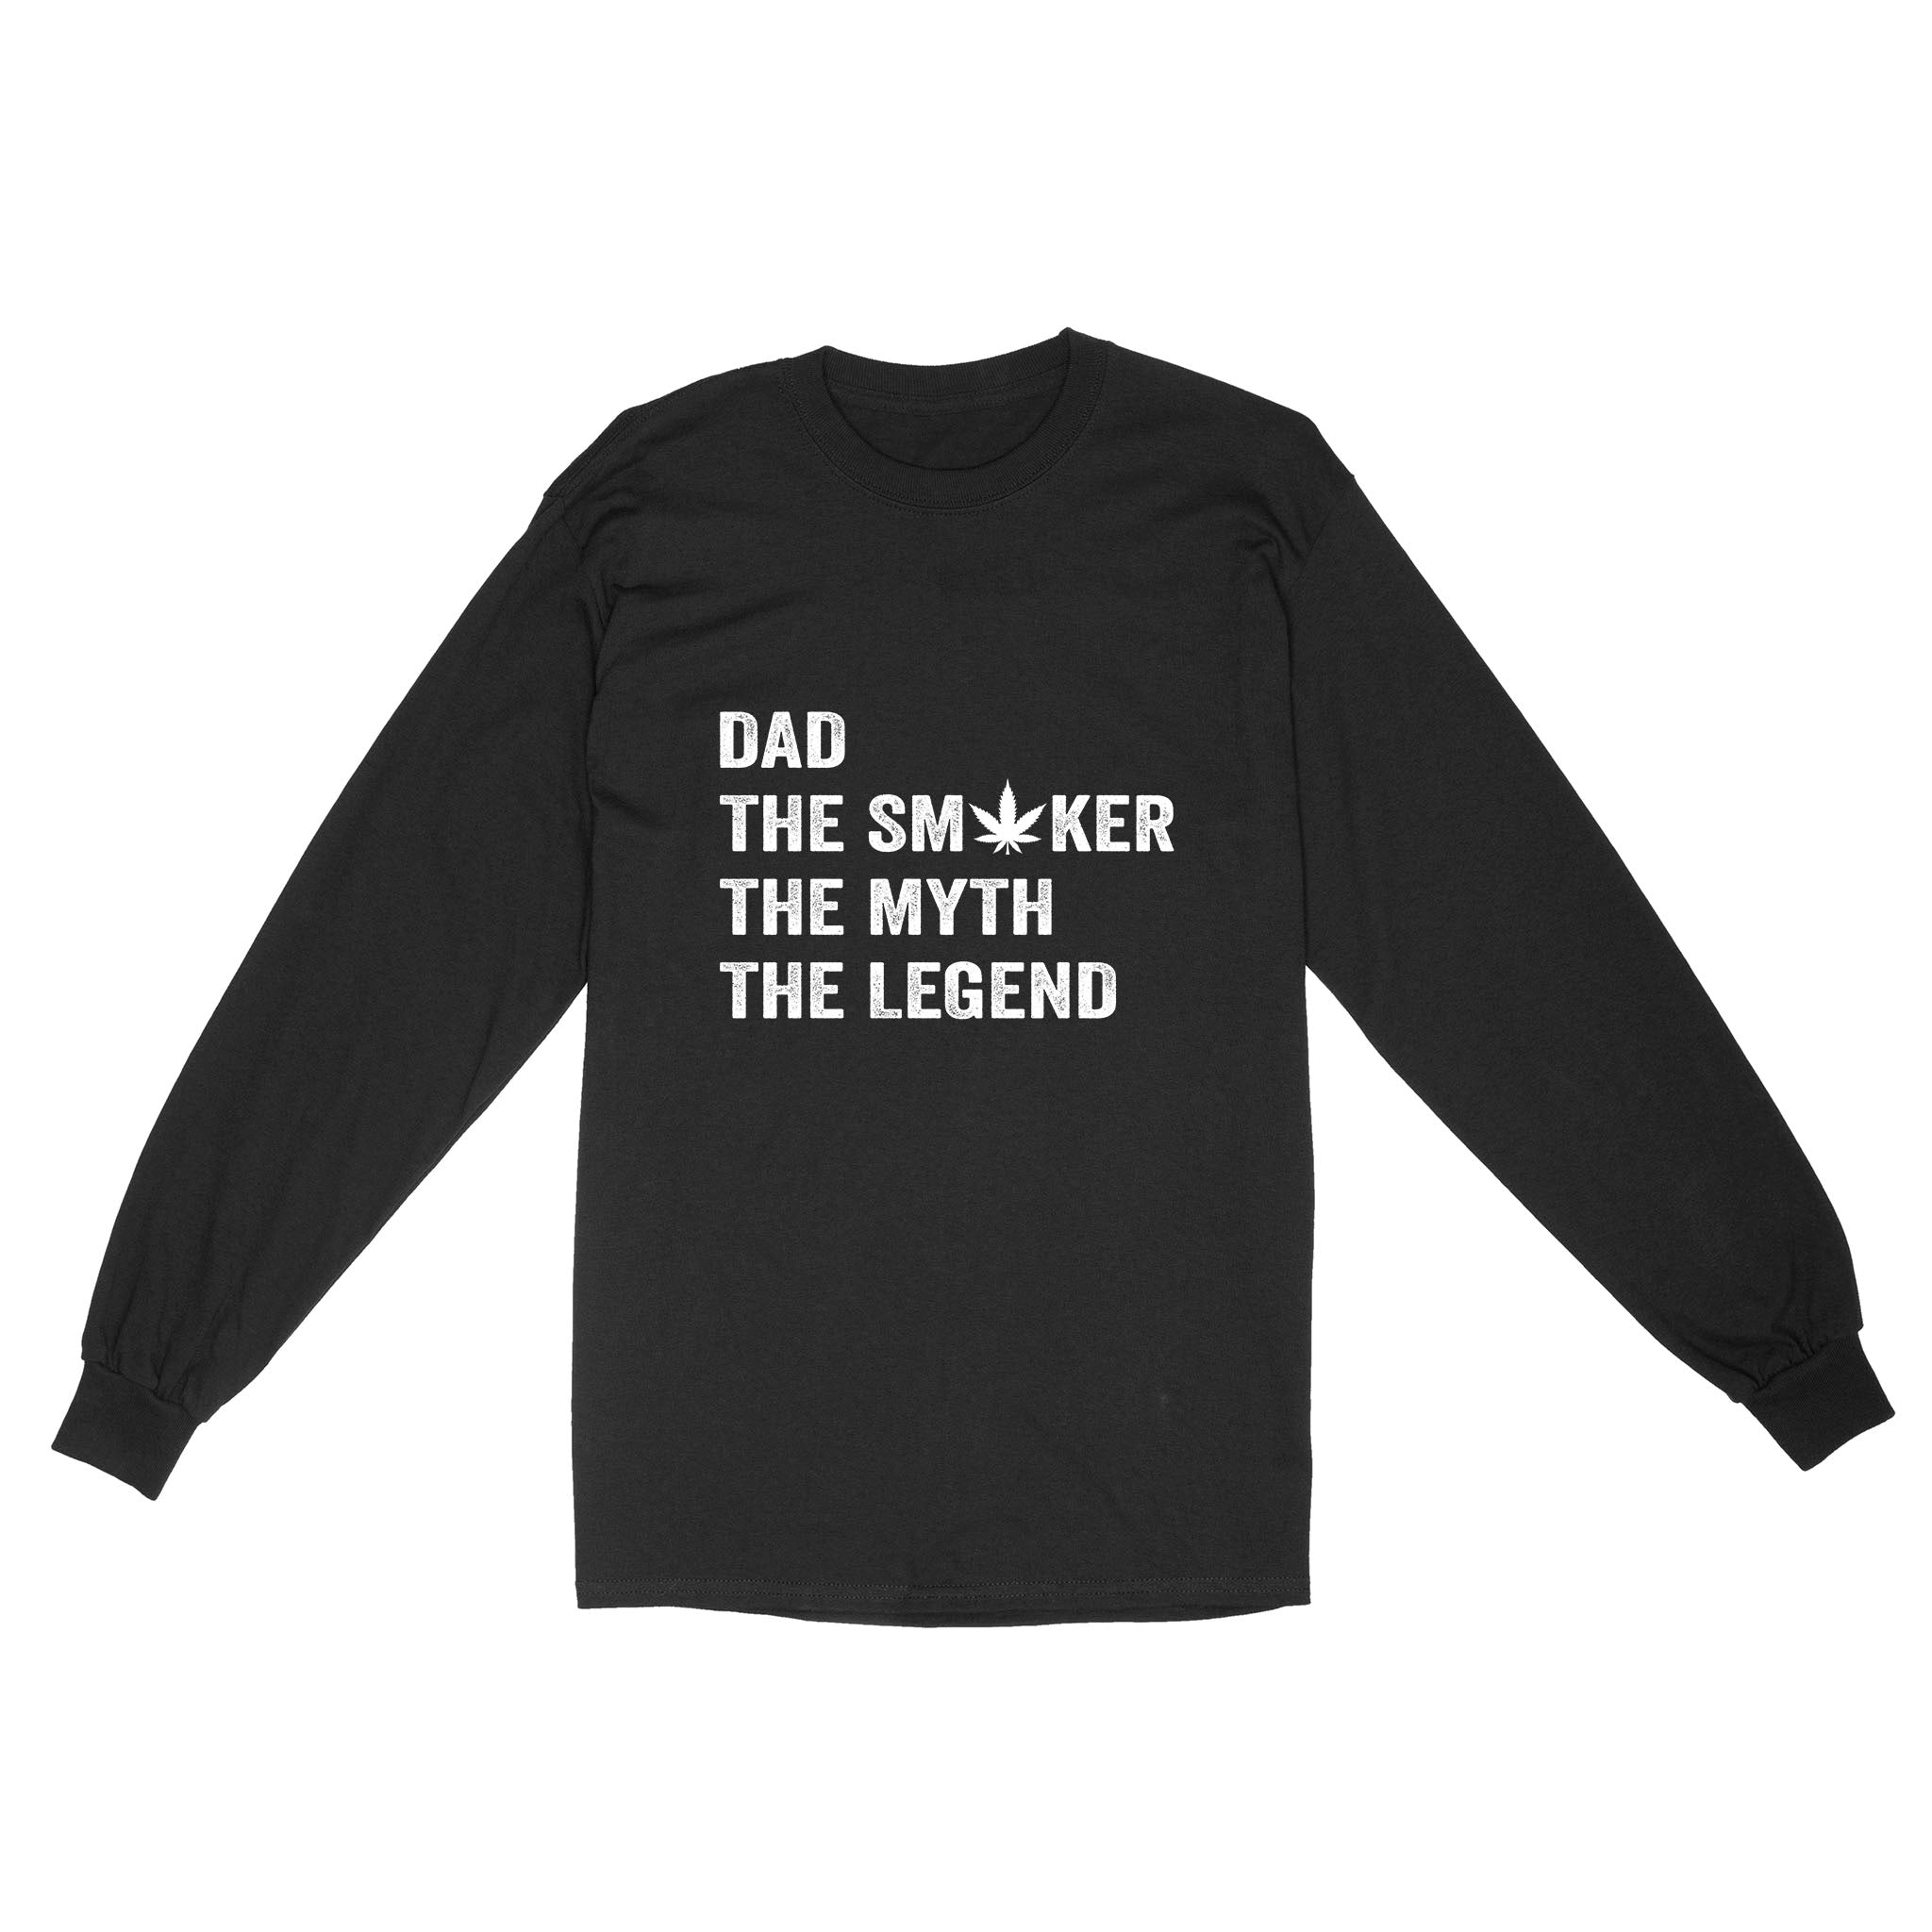 Dad The Smoker The Myth The Legend Shirt, Dad Smokes Weed Shirt | Funny Weed Shirt | Funny Leaf Shirt For Dad On Father'S Day | Awesome Marijuana Leaf Pothead Stoner 420 Dad Shirts | NS58 Long Sleeve